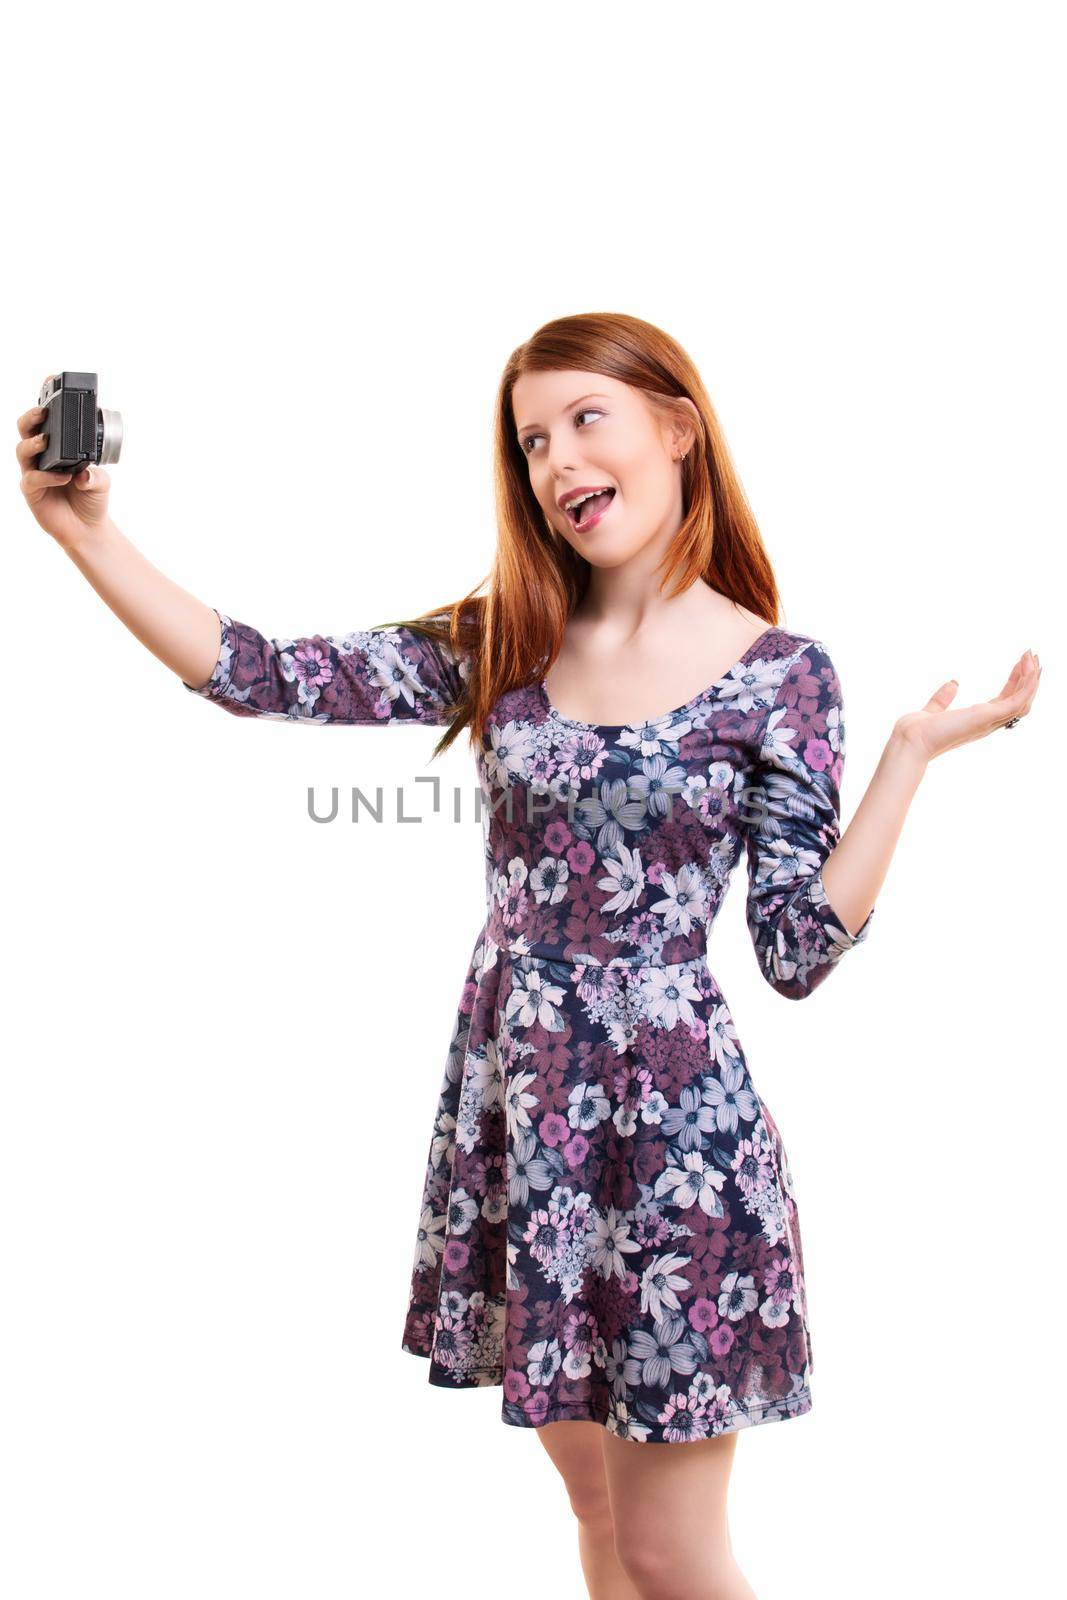 Beautiful young woman taking a selfie or vlogging by Mendelex